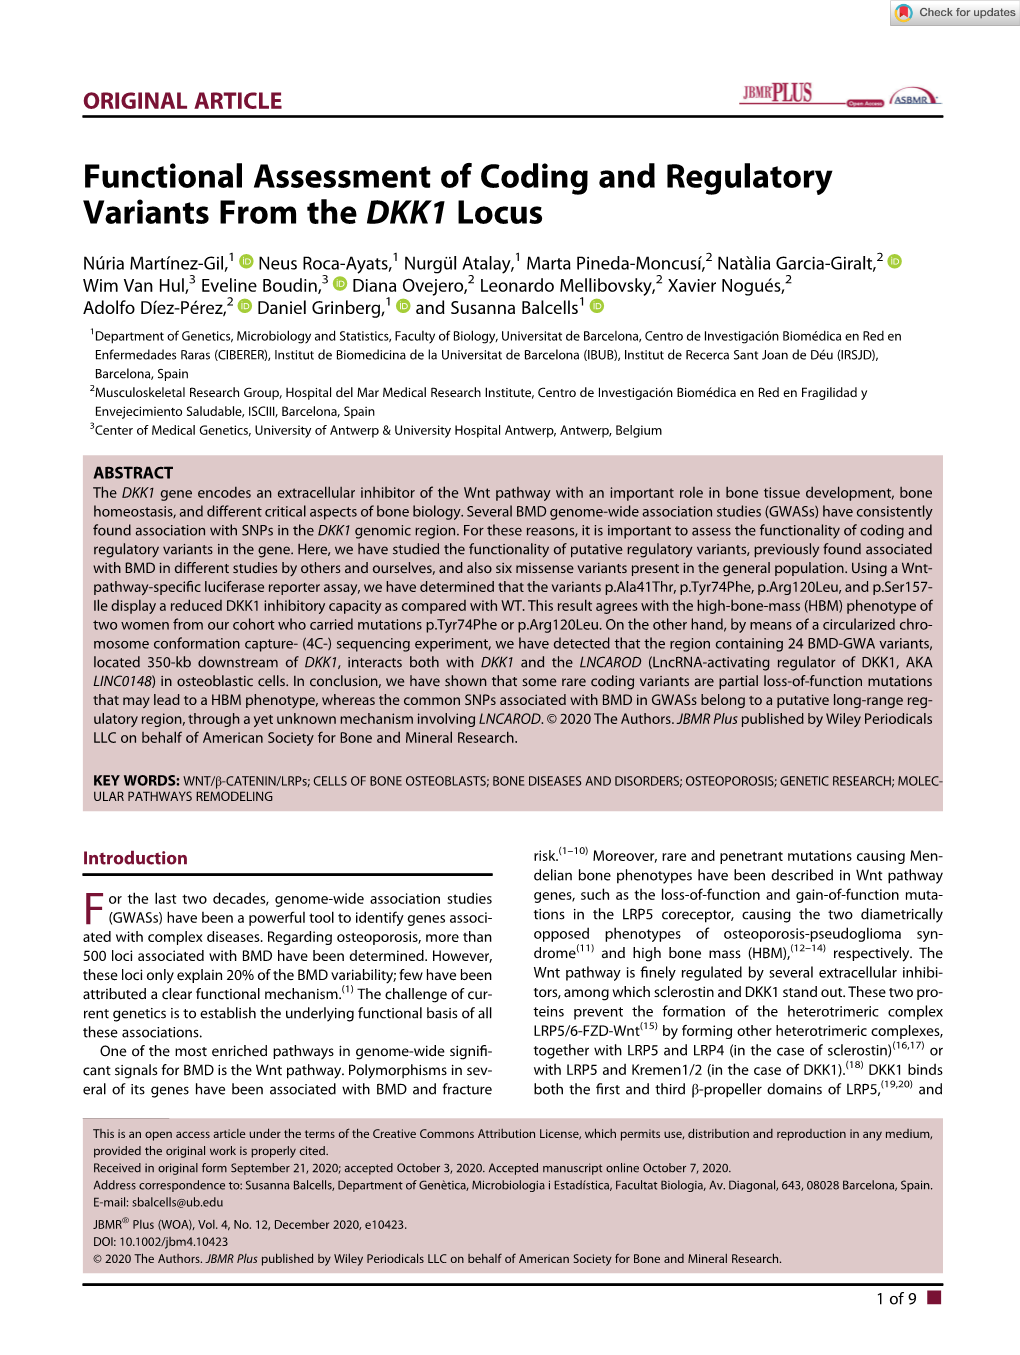 Functional Assessment of Coding and Regulatory Variants from the DKK1 Locus